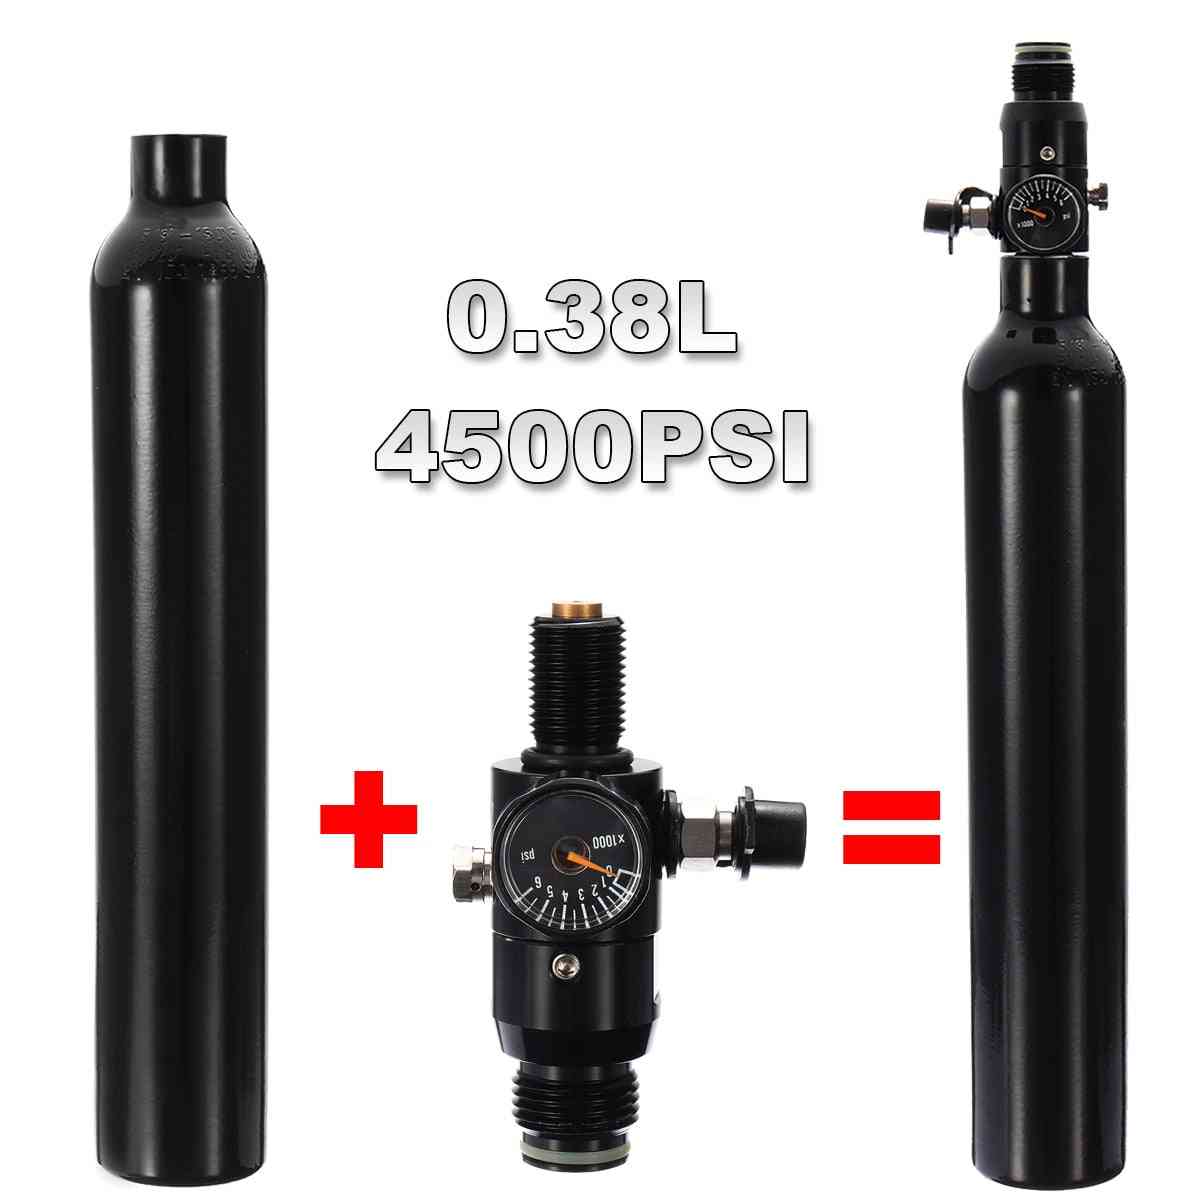 Pcp Paintball Hpa Tank 380cc Bottle 3000psi Co2 Sodas Stream Cylinder With Regulator 4500psi Output